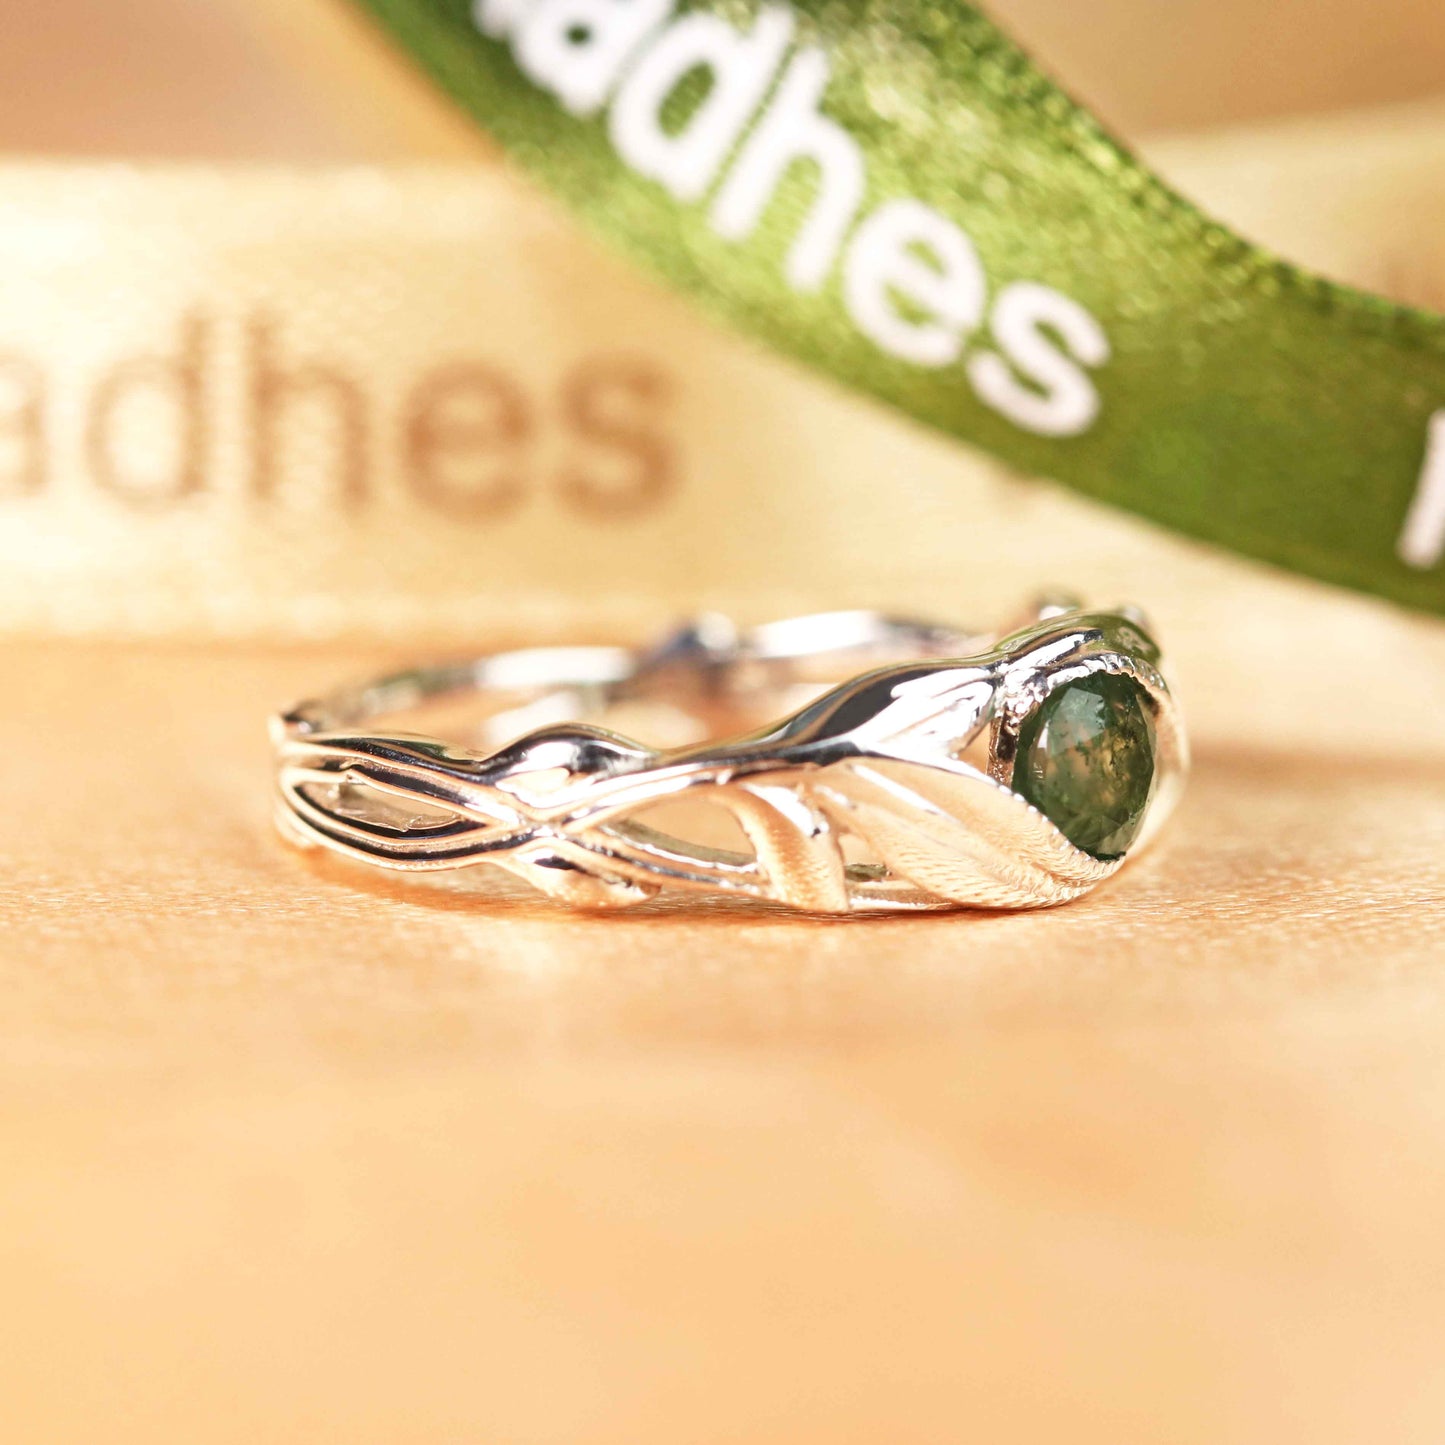 Nature-inspired 1 carat Round Cut Moss Green Agate Leafy Single Stone Engagement Ring in White Gold